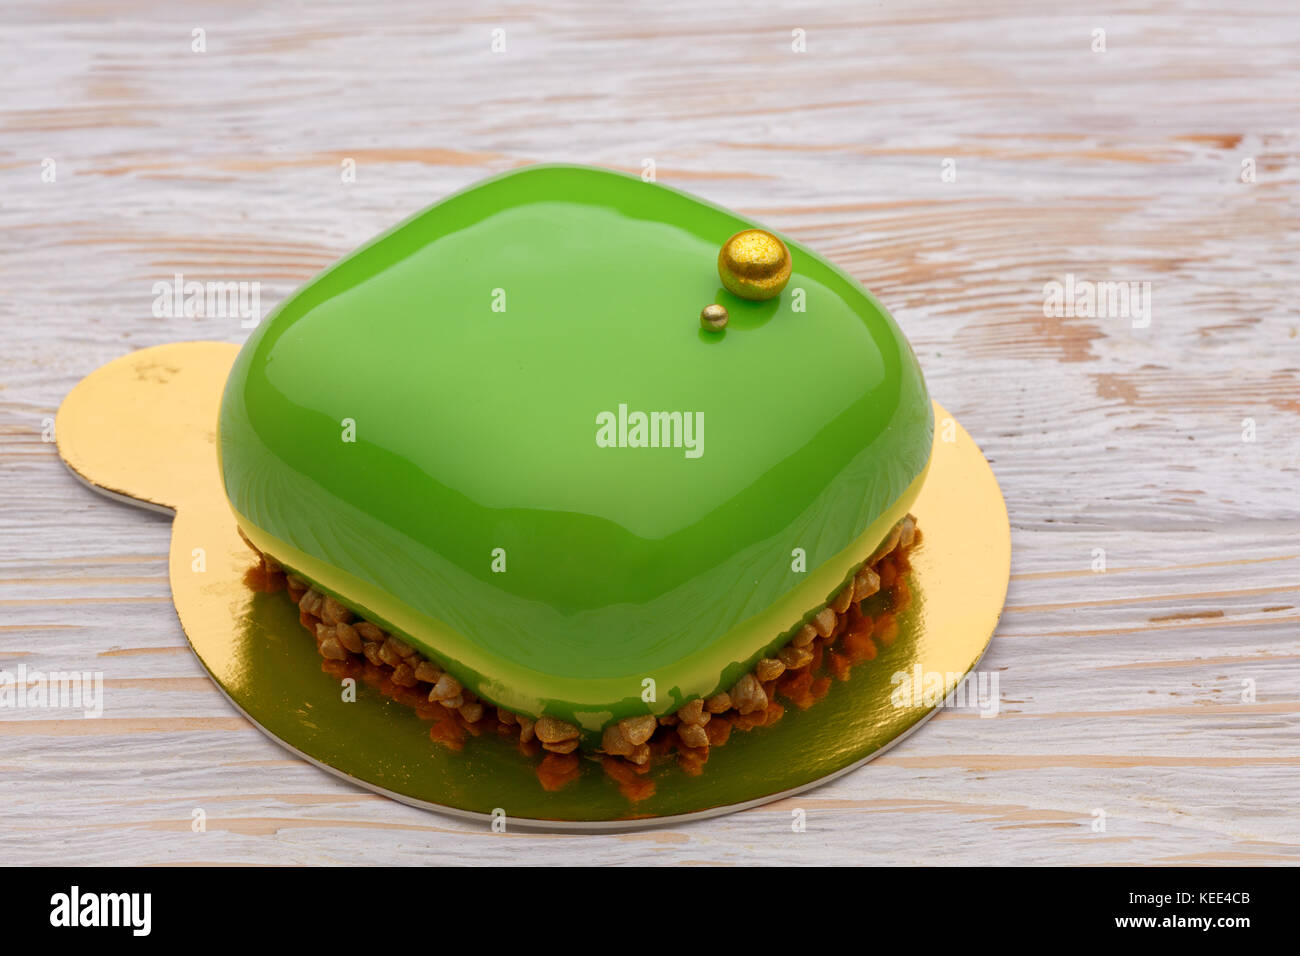 Trendy green mousse cake with mirror glaze decorated. wooden background. Close-up view Stock Photo